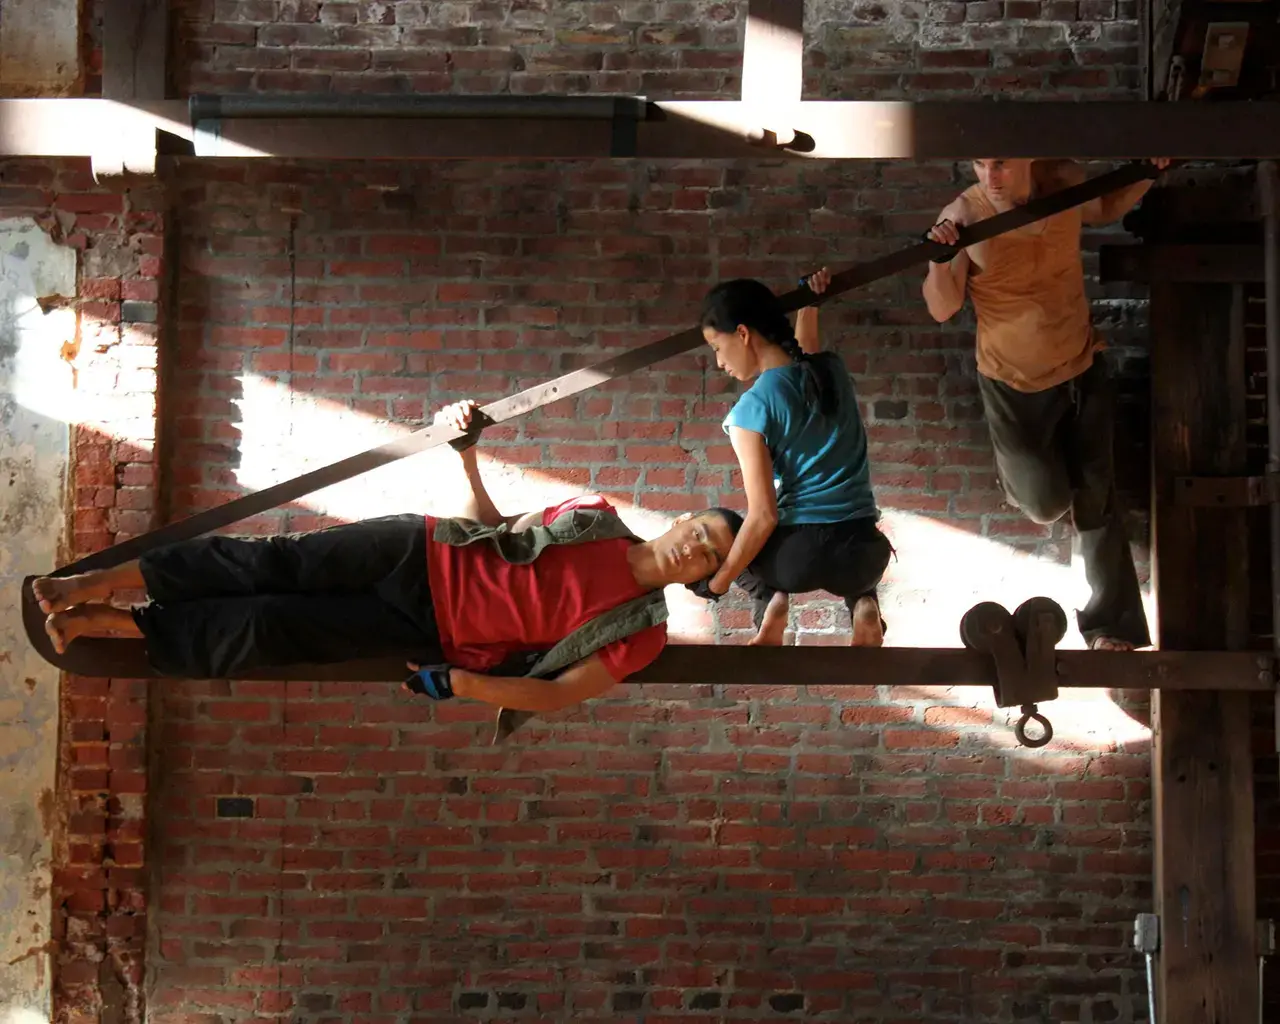 Leah Stein, Hoist. Pictured: dancers Jungwoong Kim, Michele Tantoco, and David Konyk. Photo by Michael Bartmann.